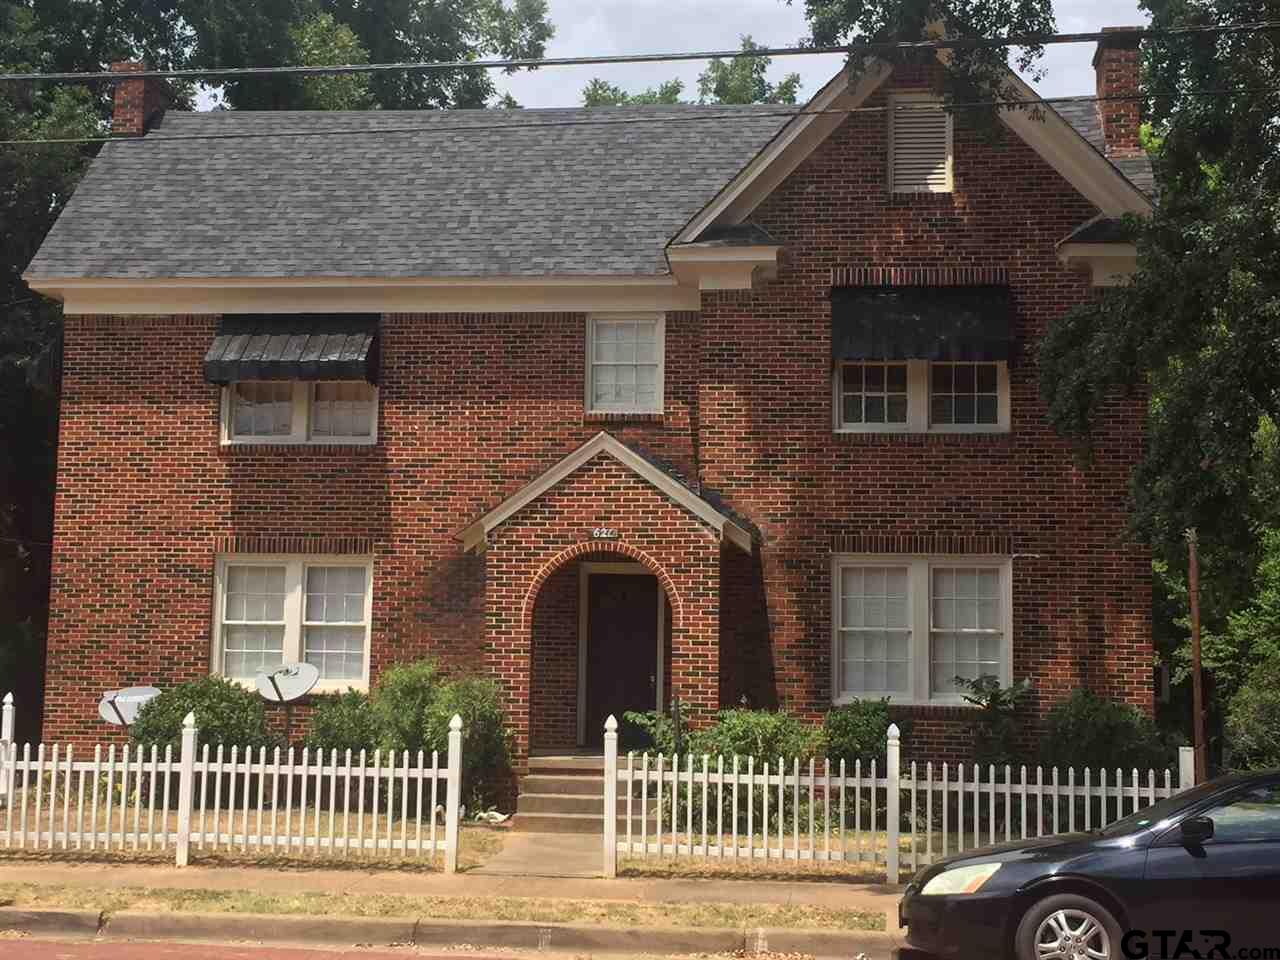 a view of a brick house with many windows